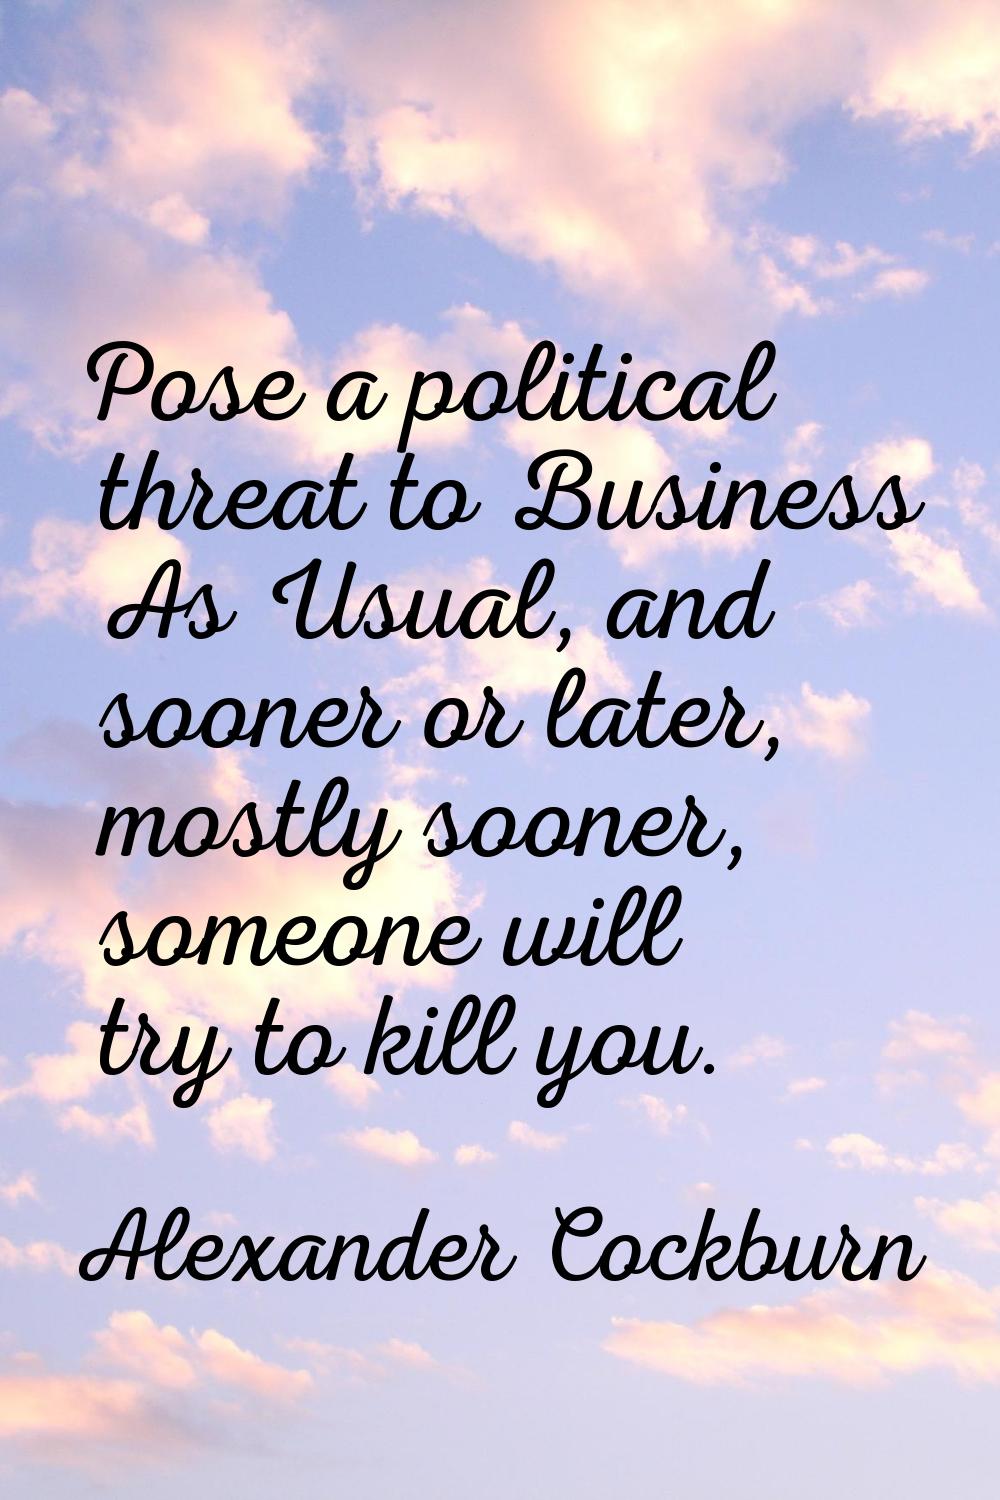 Pose a political threat to Business As Usual, and sooner or later, mostly sooner, someone will try 